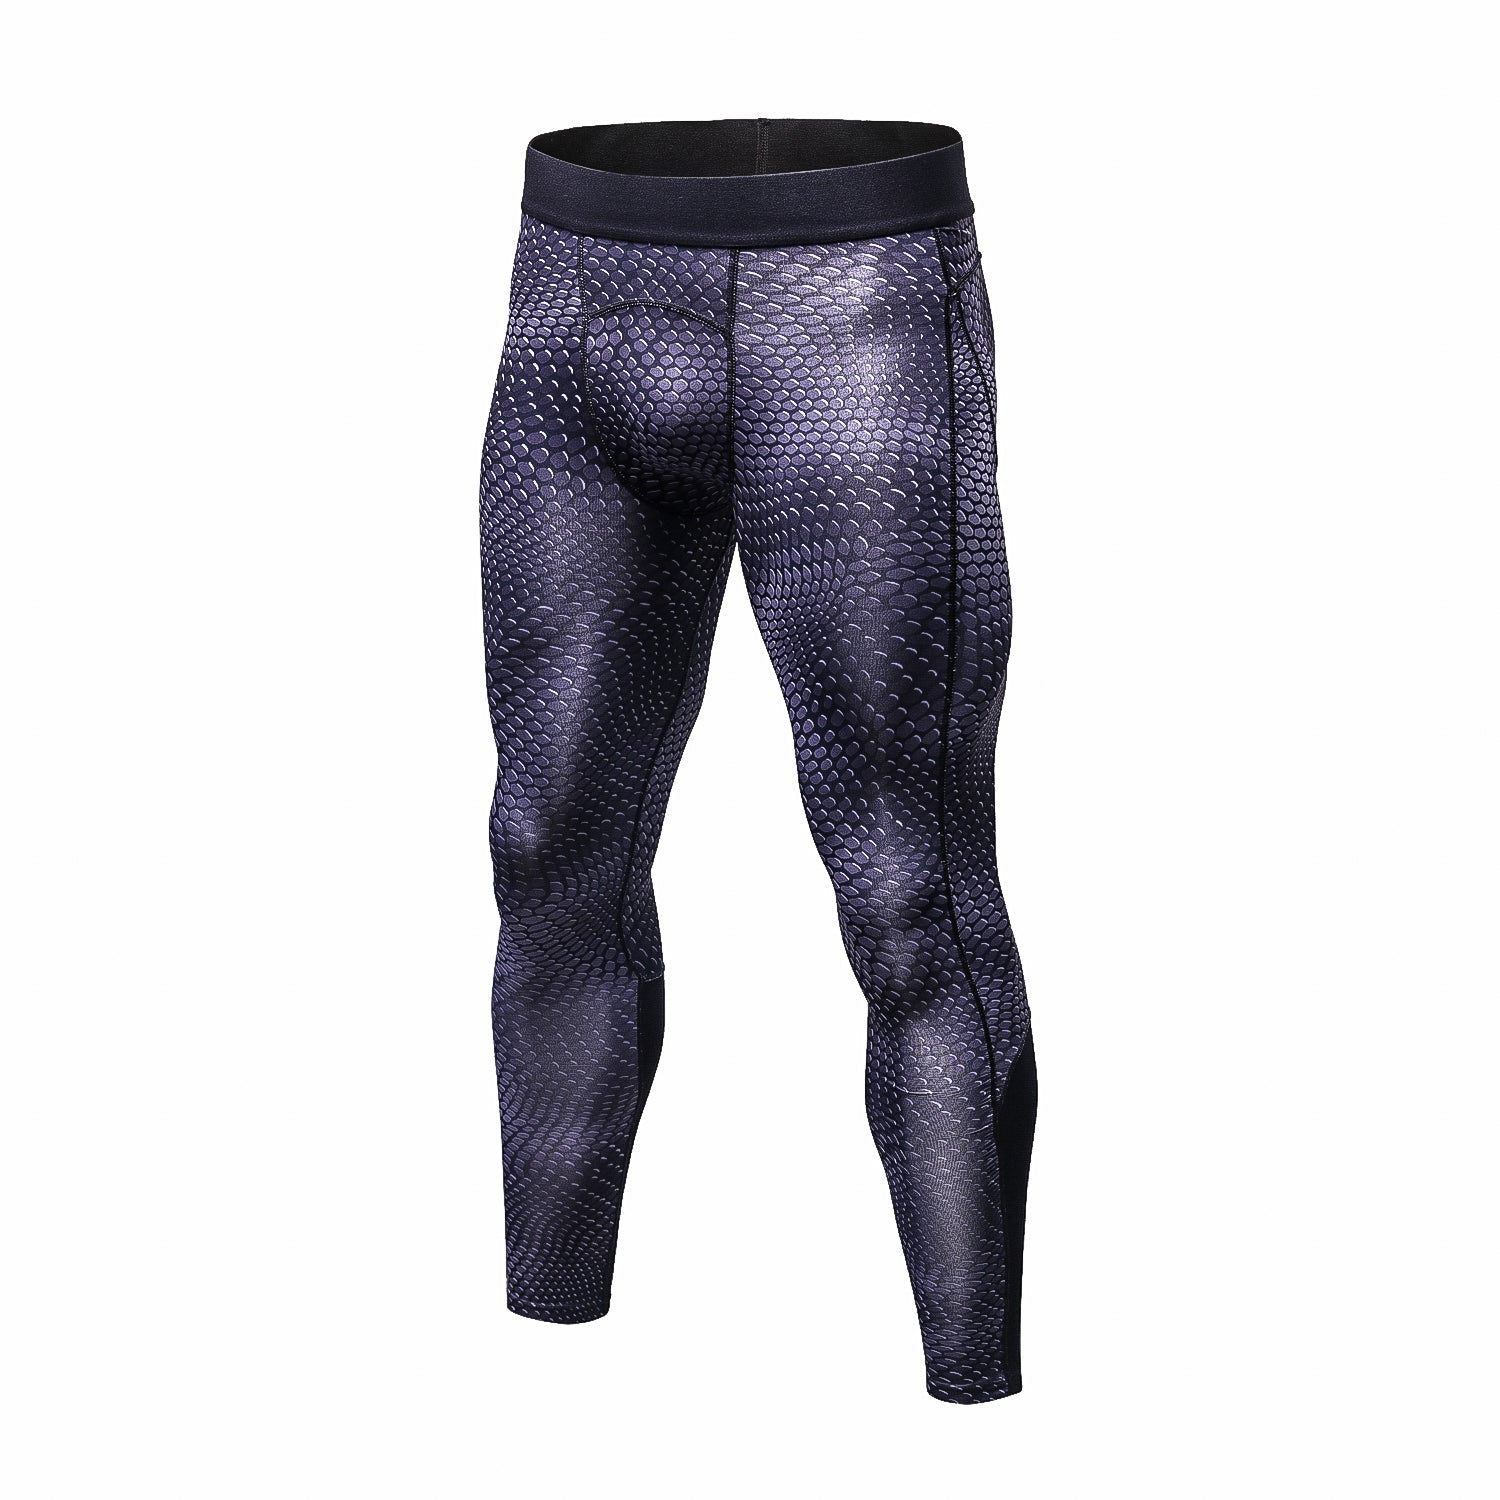 Mens Compression Pants Running Tights Quick Dry Workout Leggings Gym Basic  Layer Pants